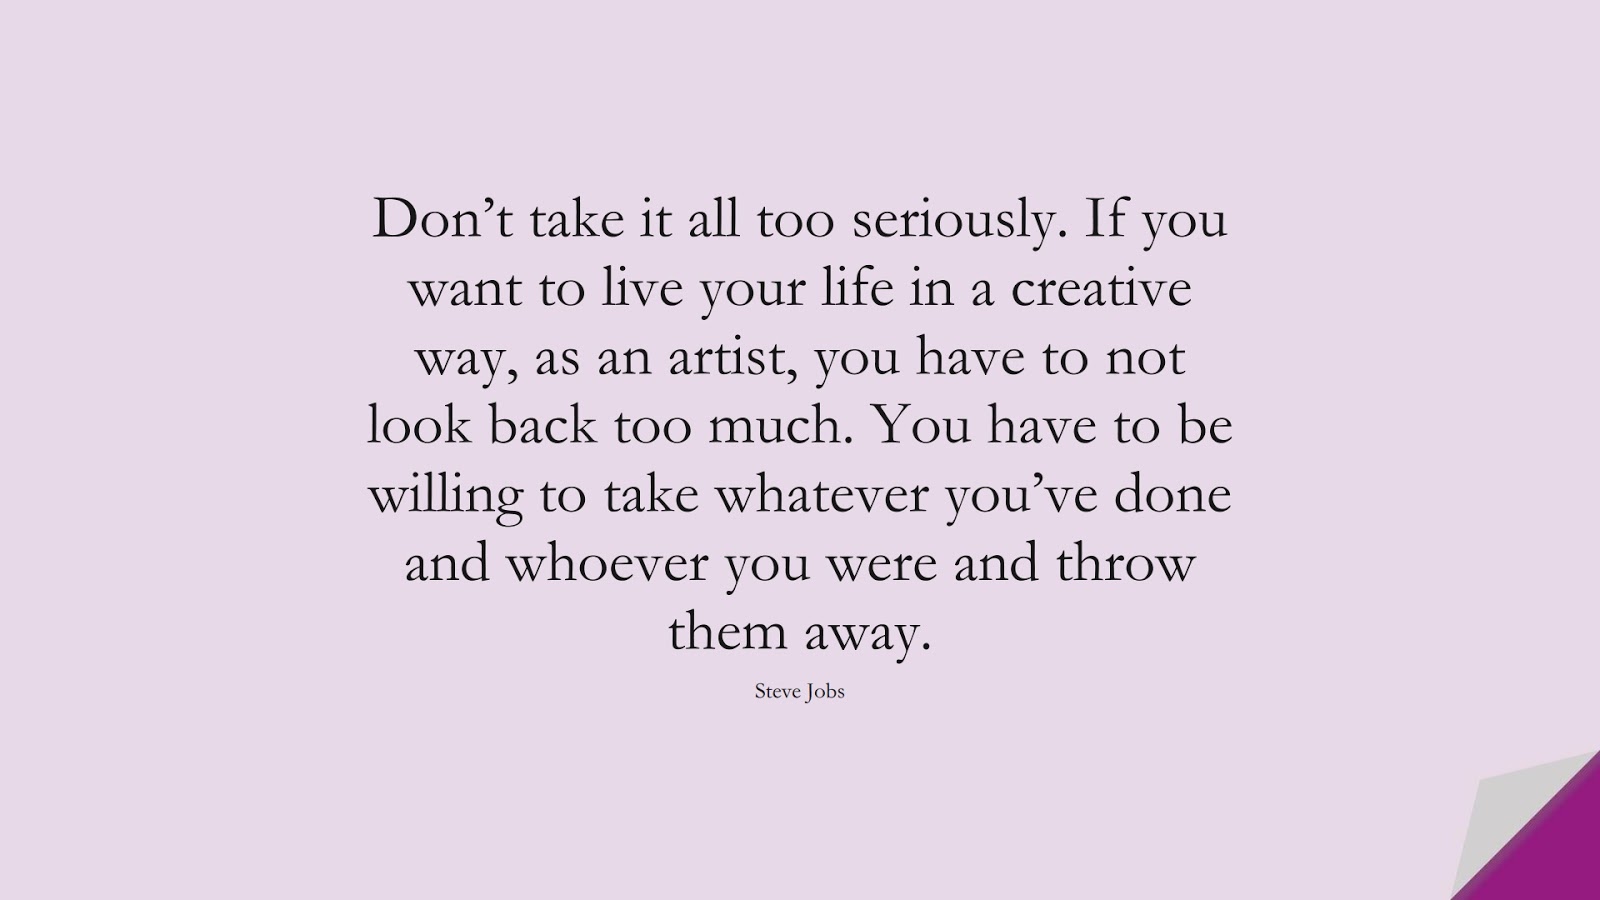 Don’t take it all too seriously. If you want to live your life in a creative way, as an artist, you have to not look back too much. You have to be willing to take whatever you’ve done and whoever you were and throw them away. (Steve Jobs);  #SteveJobsQuotes